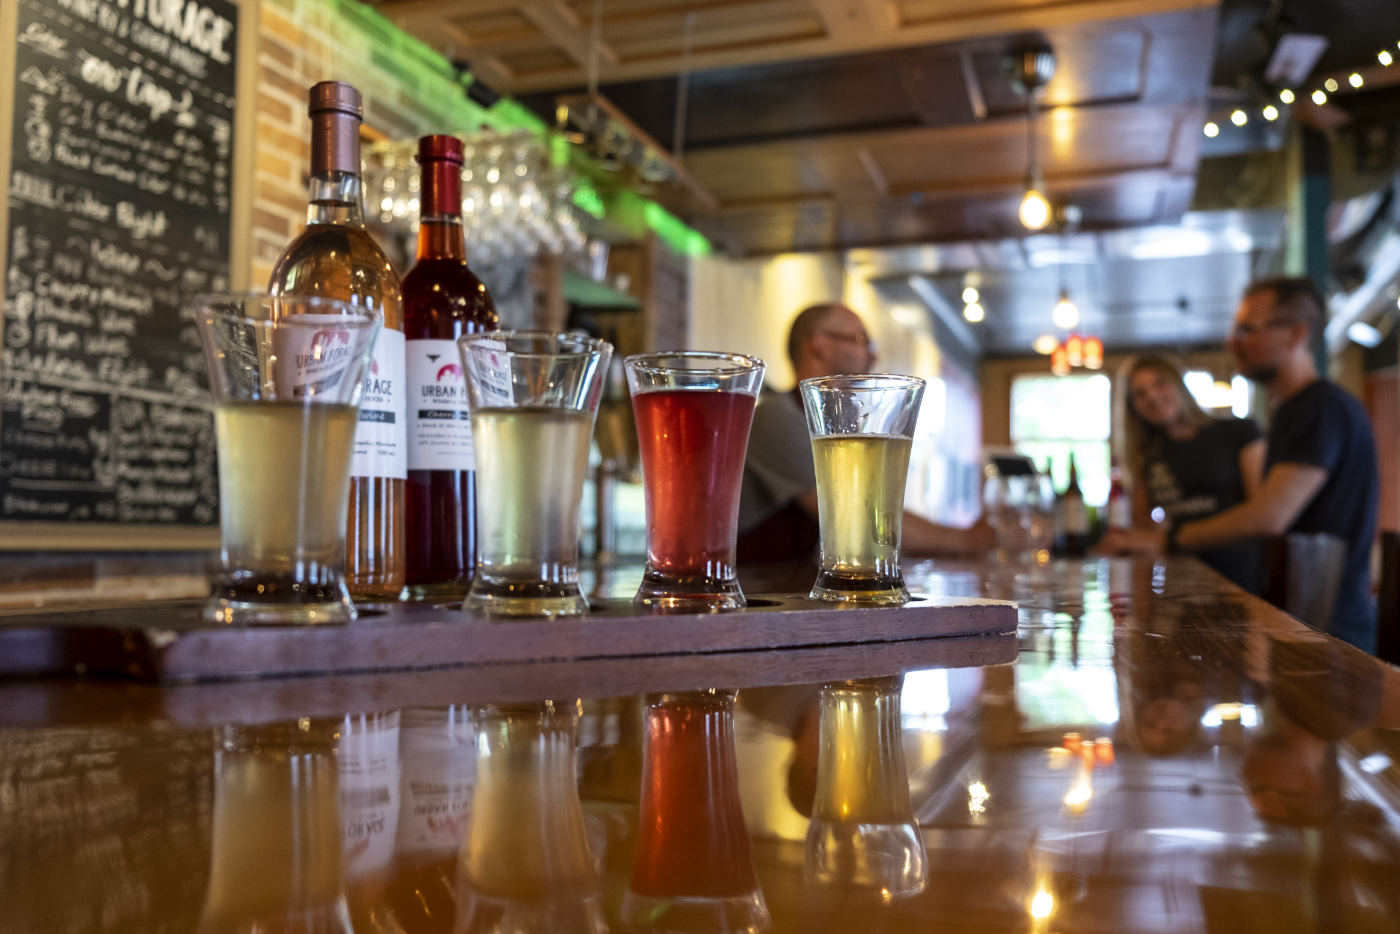 Four glasses of cider colored pale straw to light red with bottles and background out of focus with bar and people